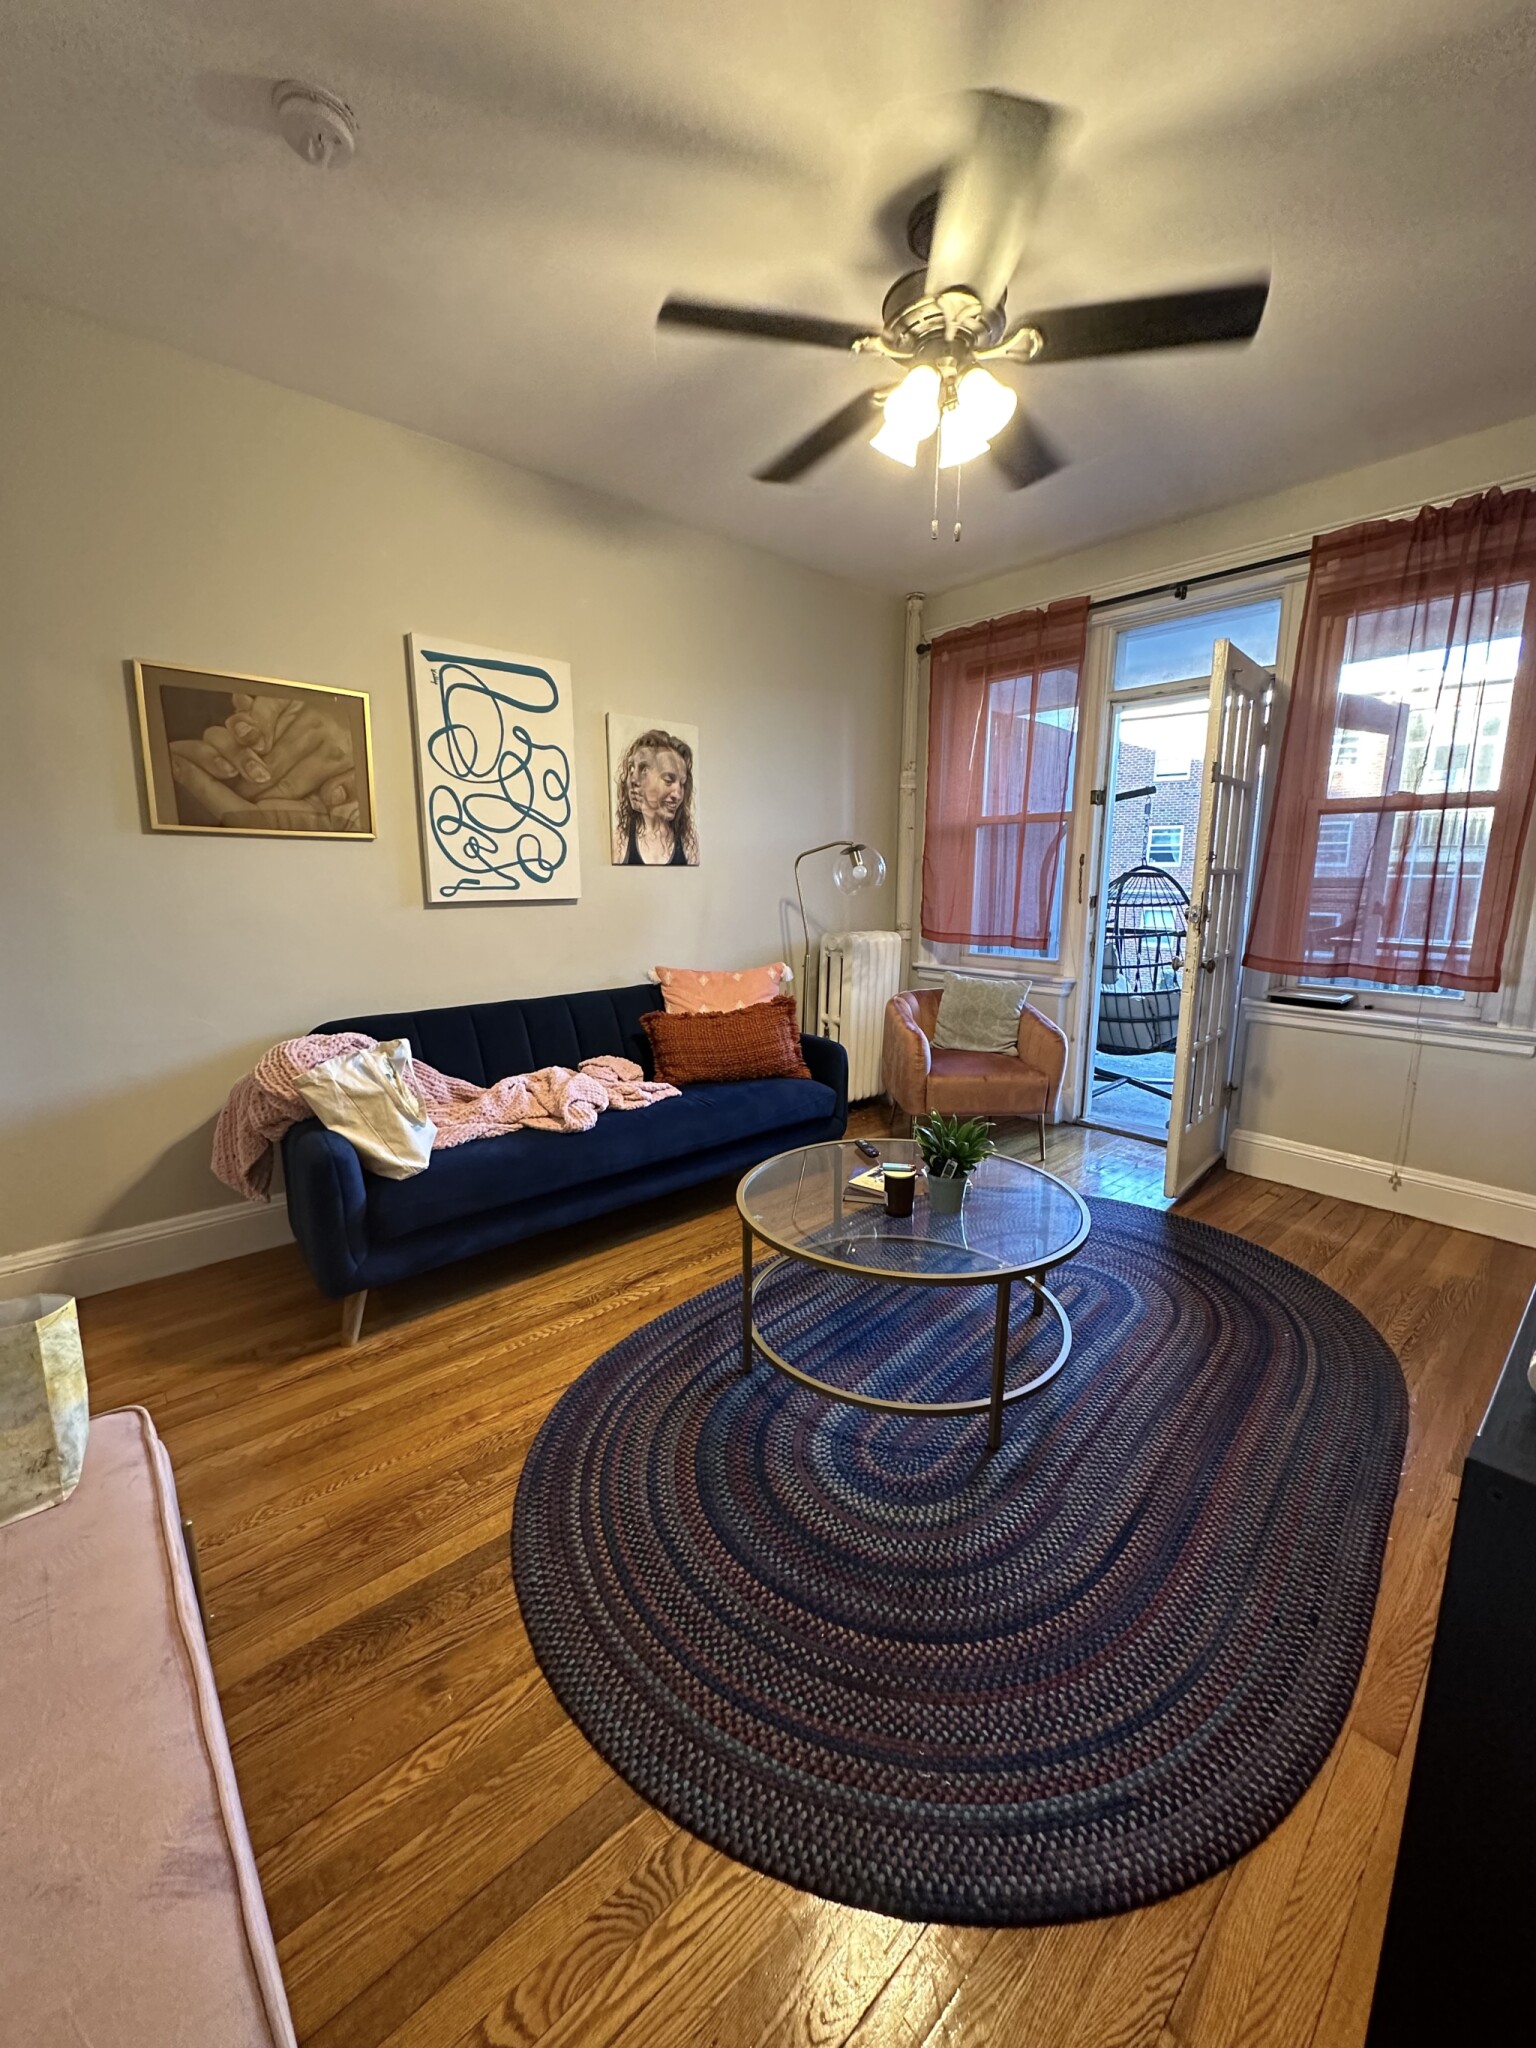 Photos of apartment on Camelot Ct.,Boston MA 02135